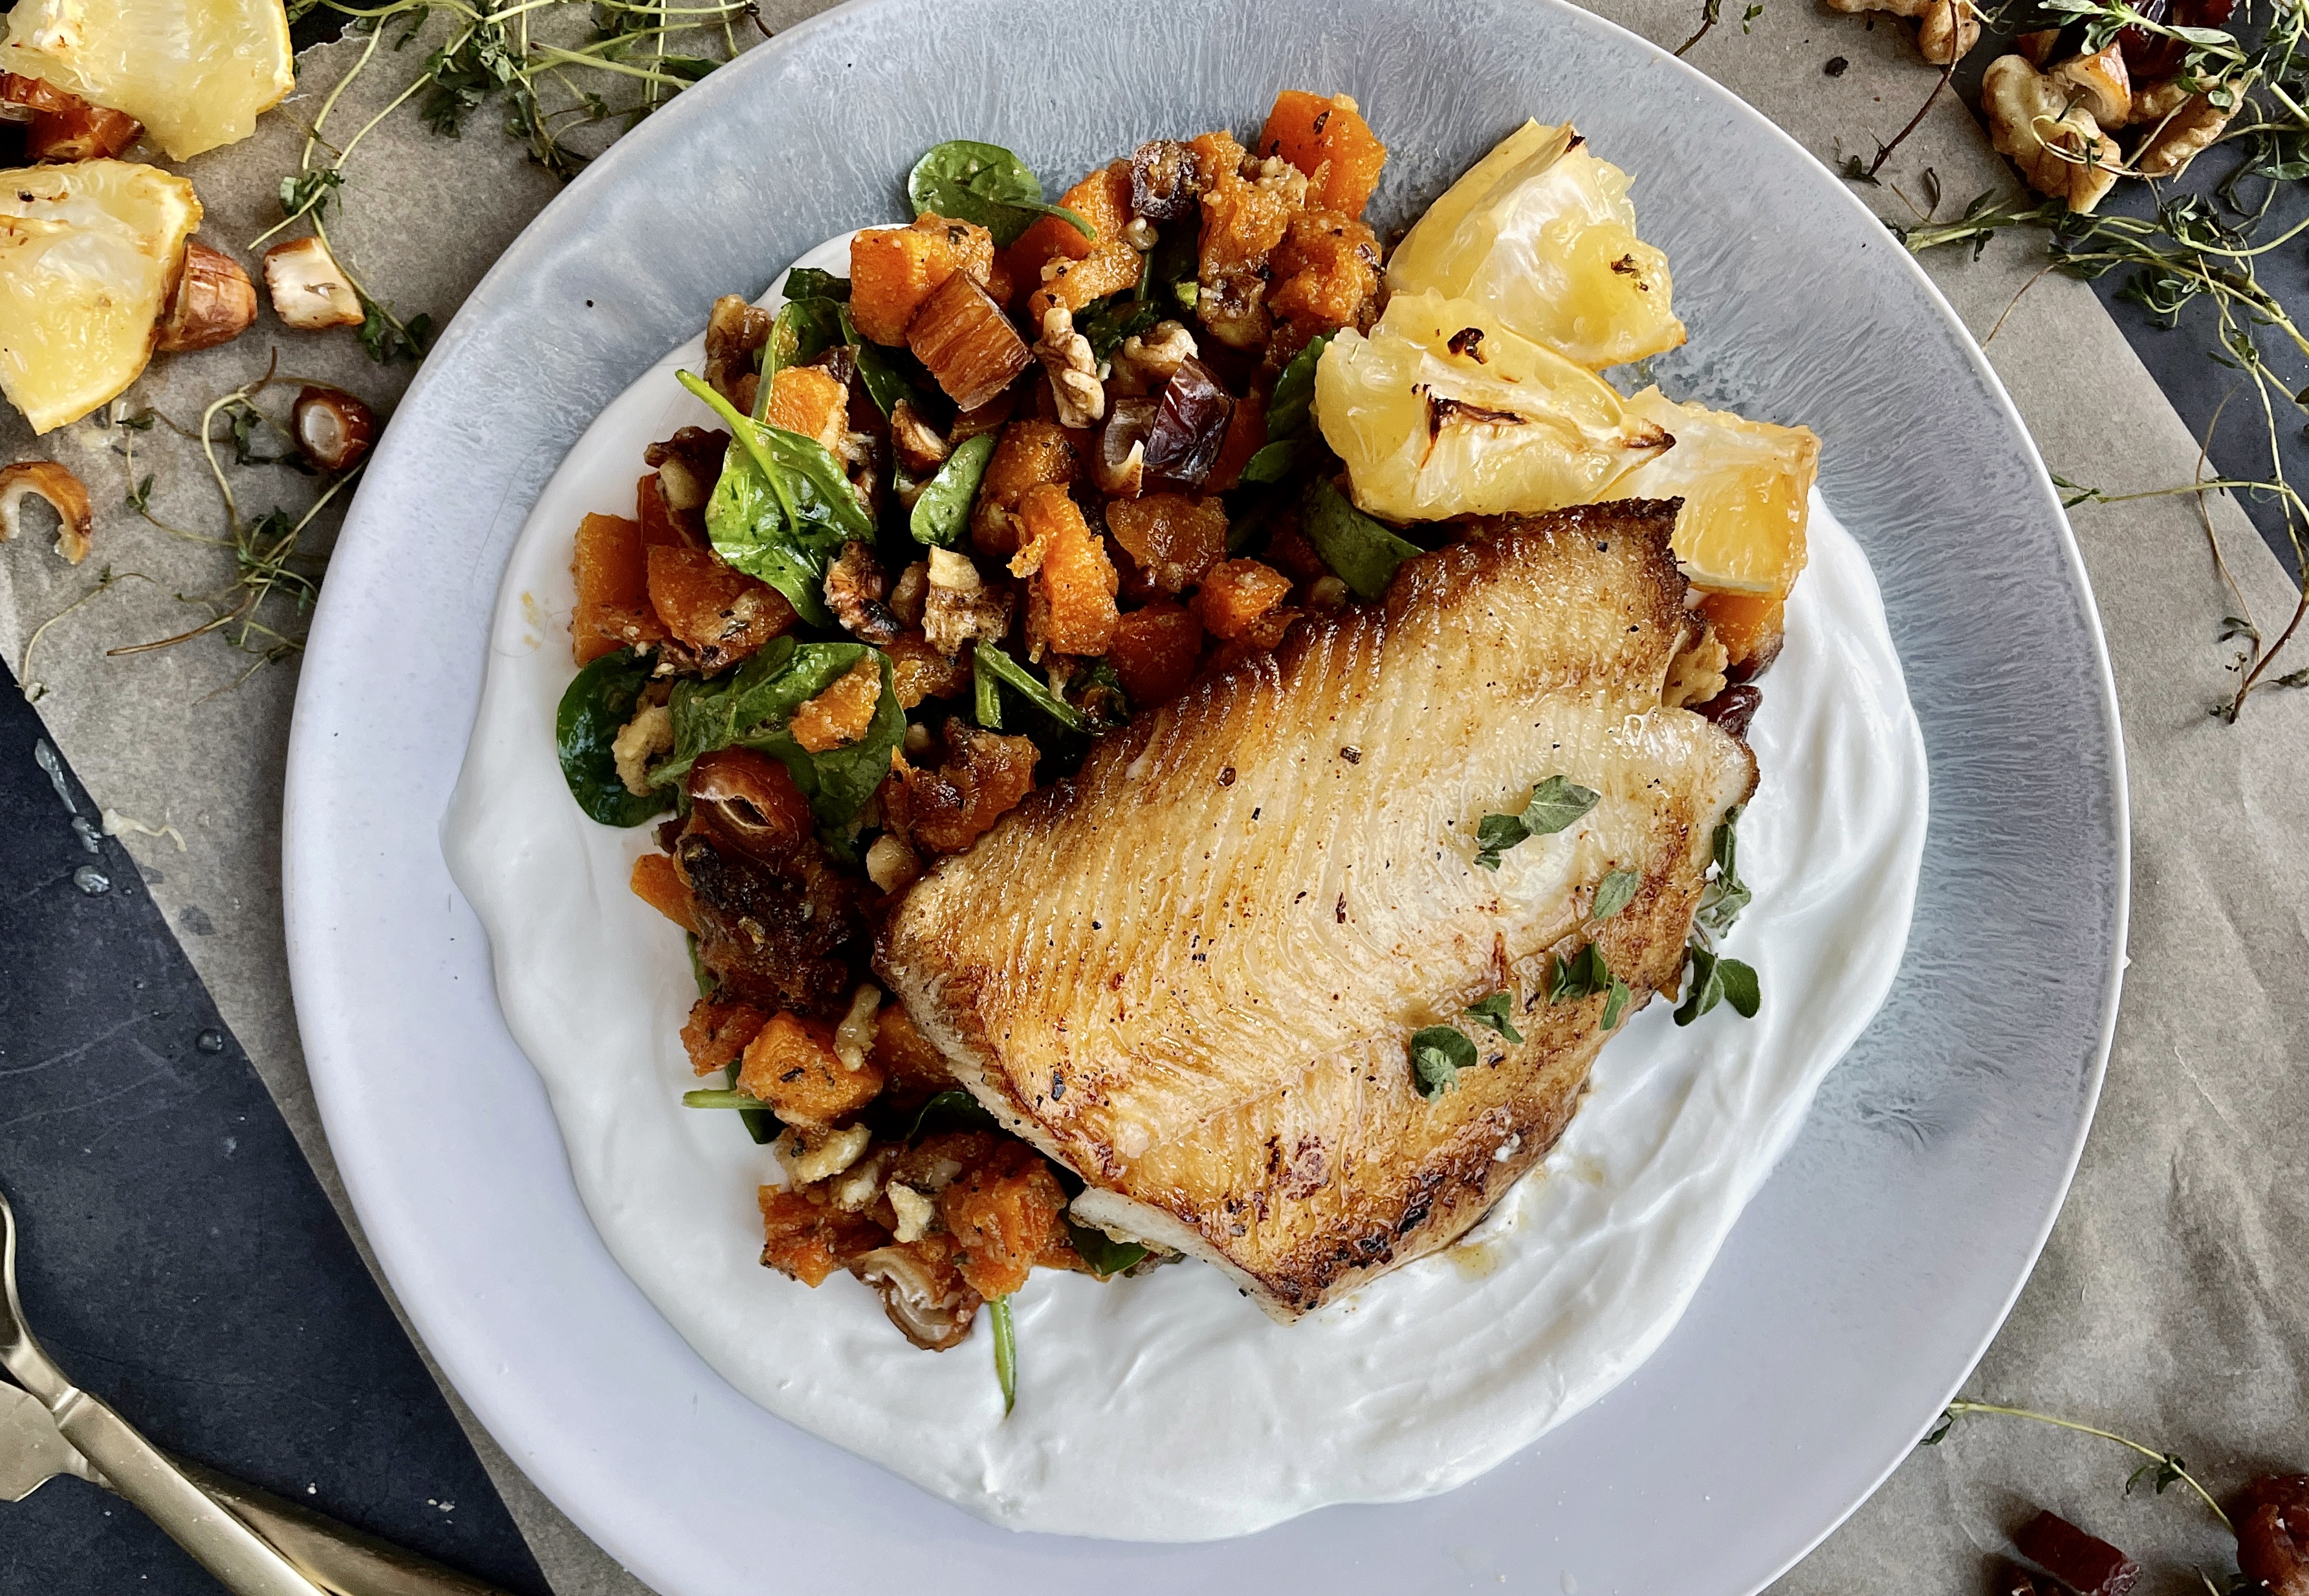 Caramelized Butternut Squash and Whipped Ricotta Sea Bass